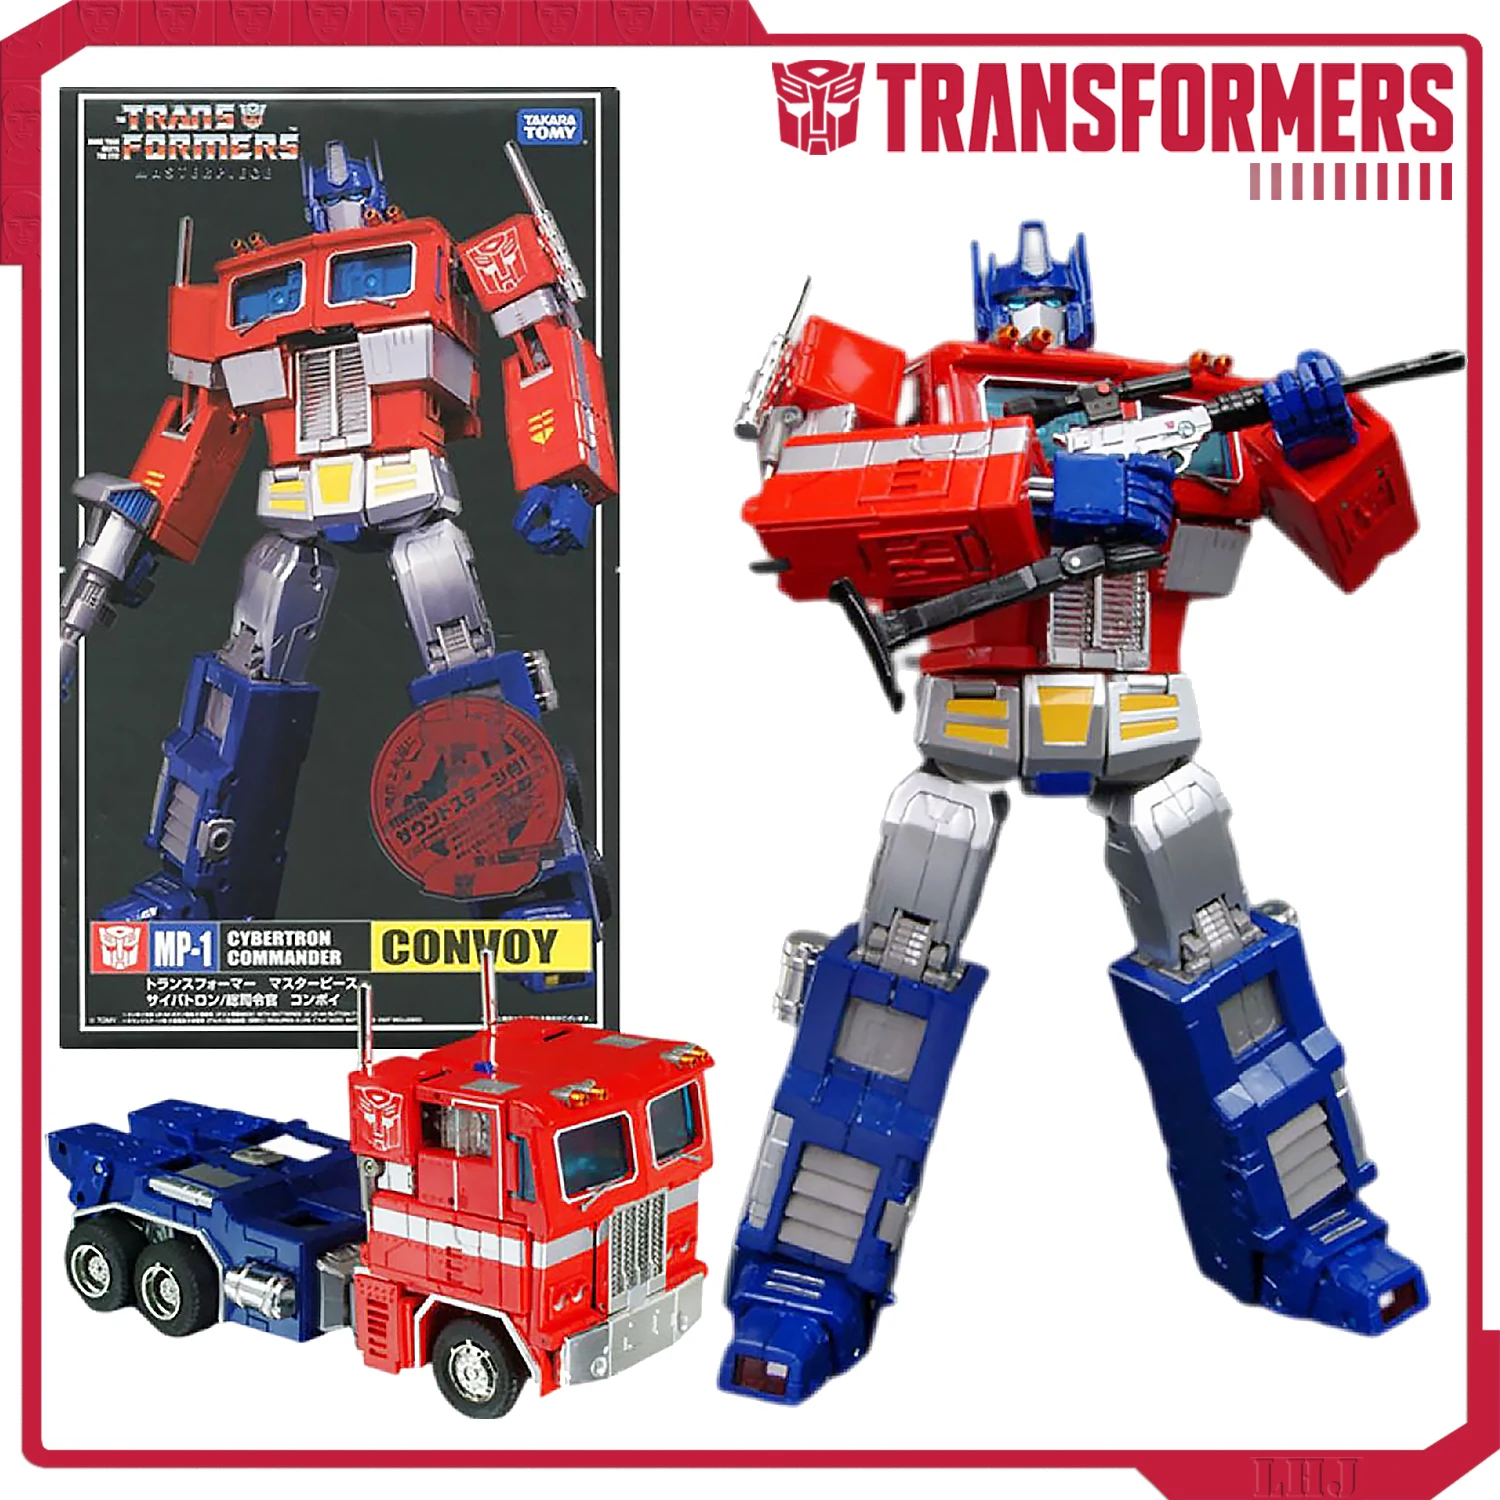 

TAKARA TOMY Transformers MP Series MP1 MP-01 Optimus Prime Convoy Model Masterpiece MP-01L Action Figure Boys Birthday Gift Toy